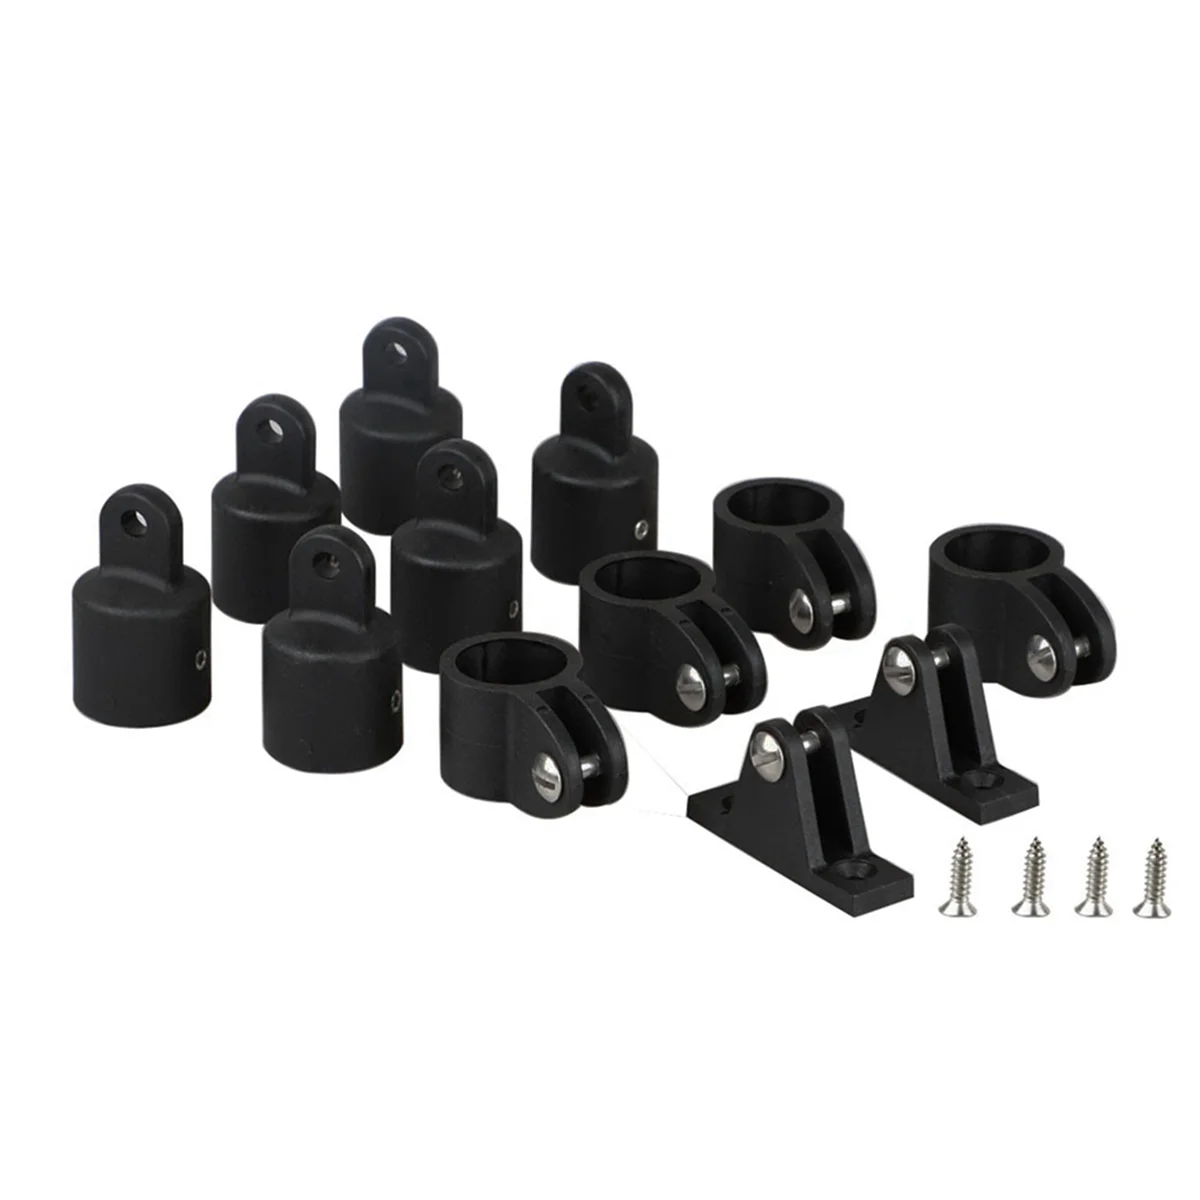 

12Pc 25Mm Marine Canopy Deck Hinge Claw Sliding Eye End Fittings Hardware General DIY Tools Solid Hardware Tools